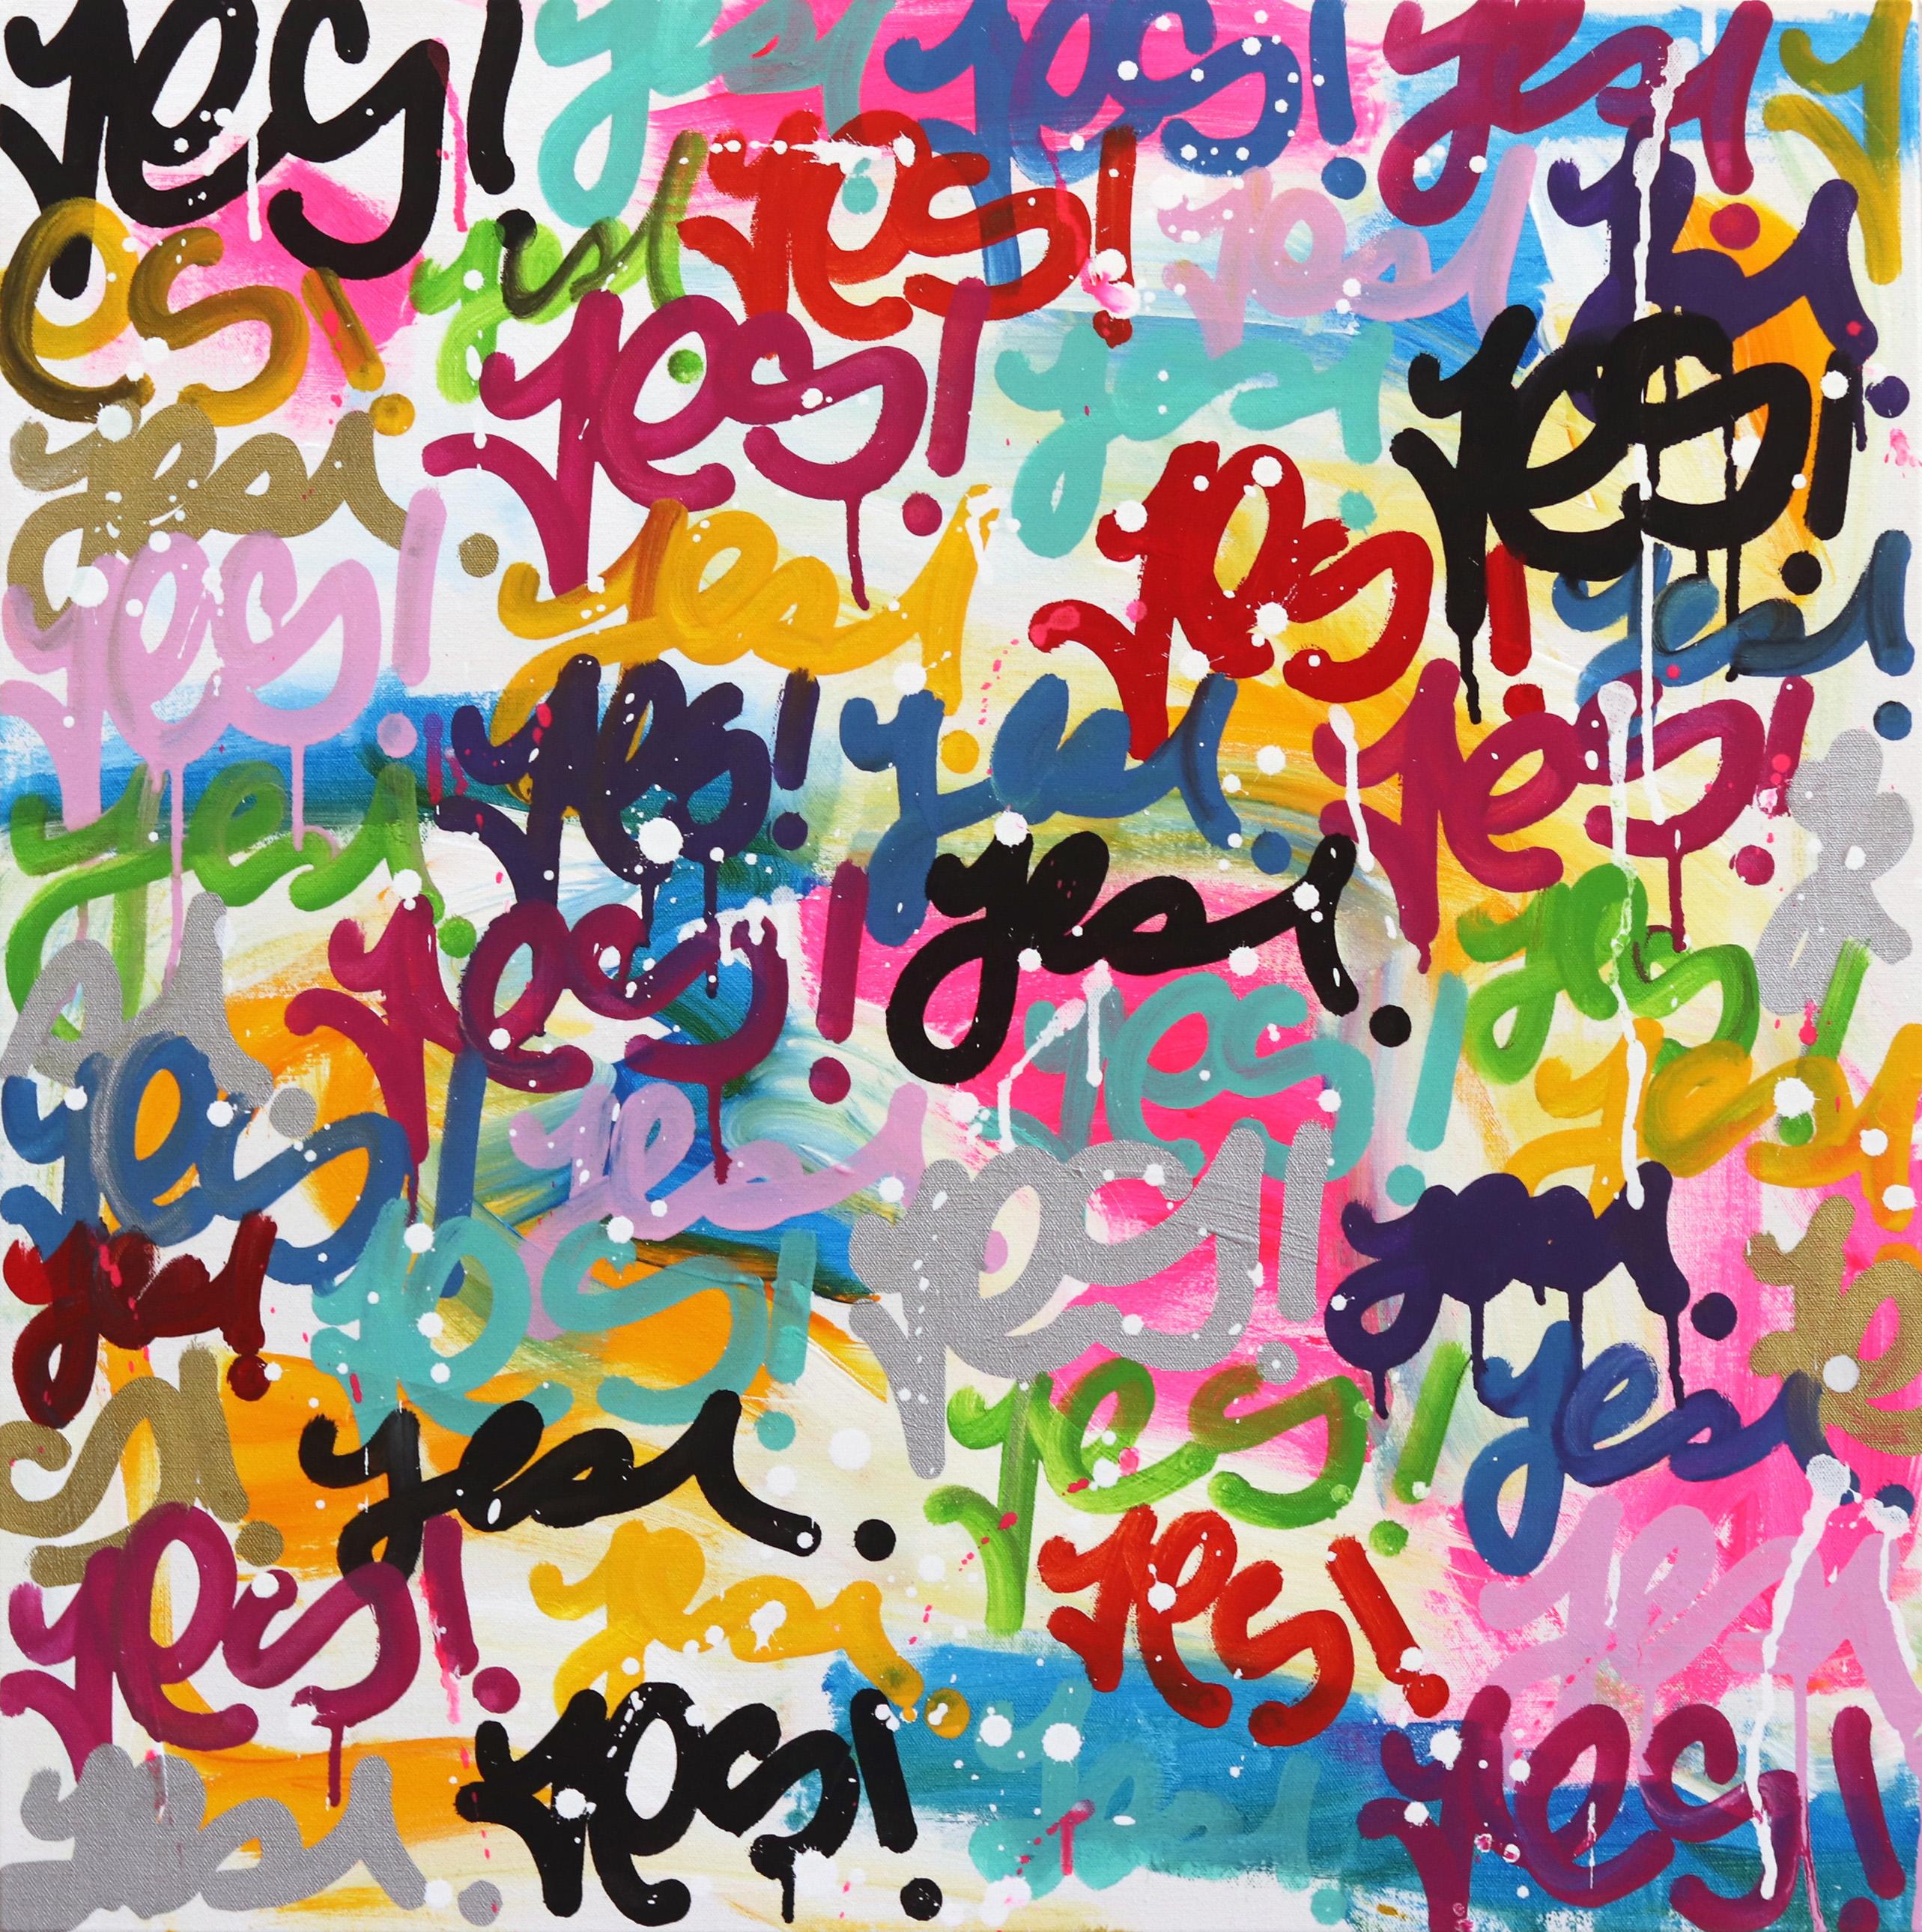 Bold Yes! - Mixed Media Art by Amber Goldhammer